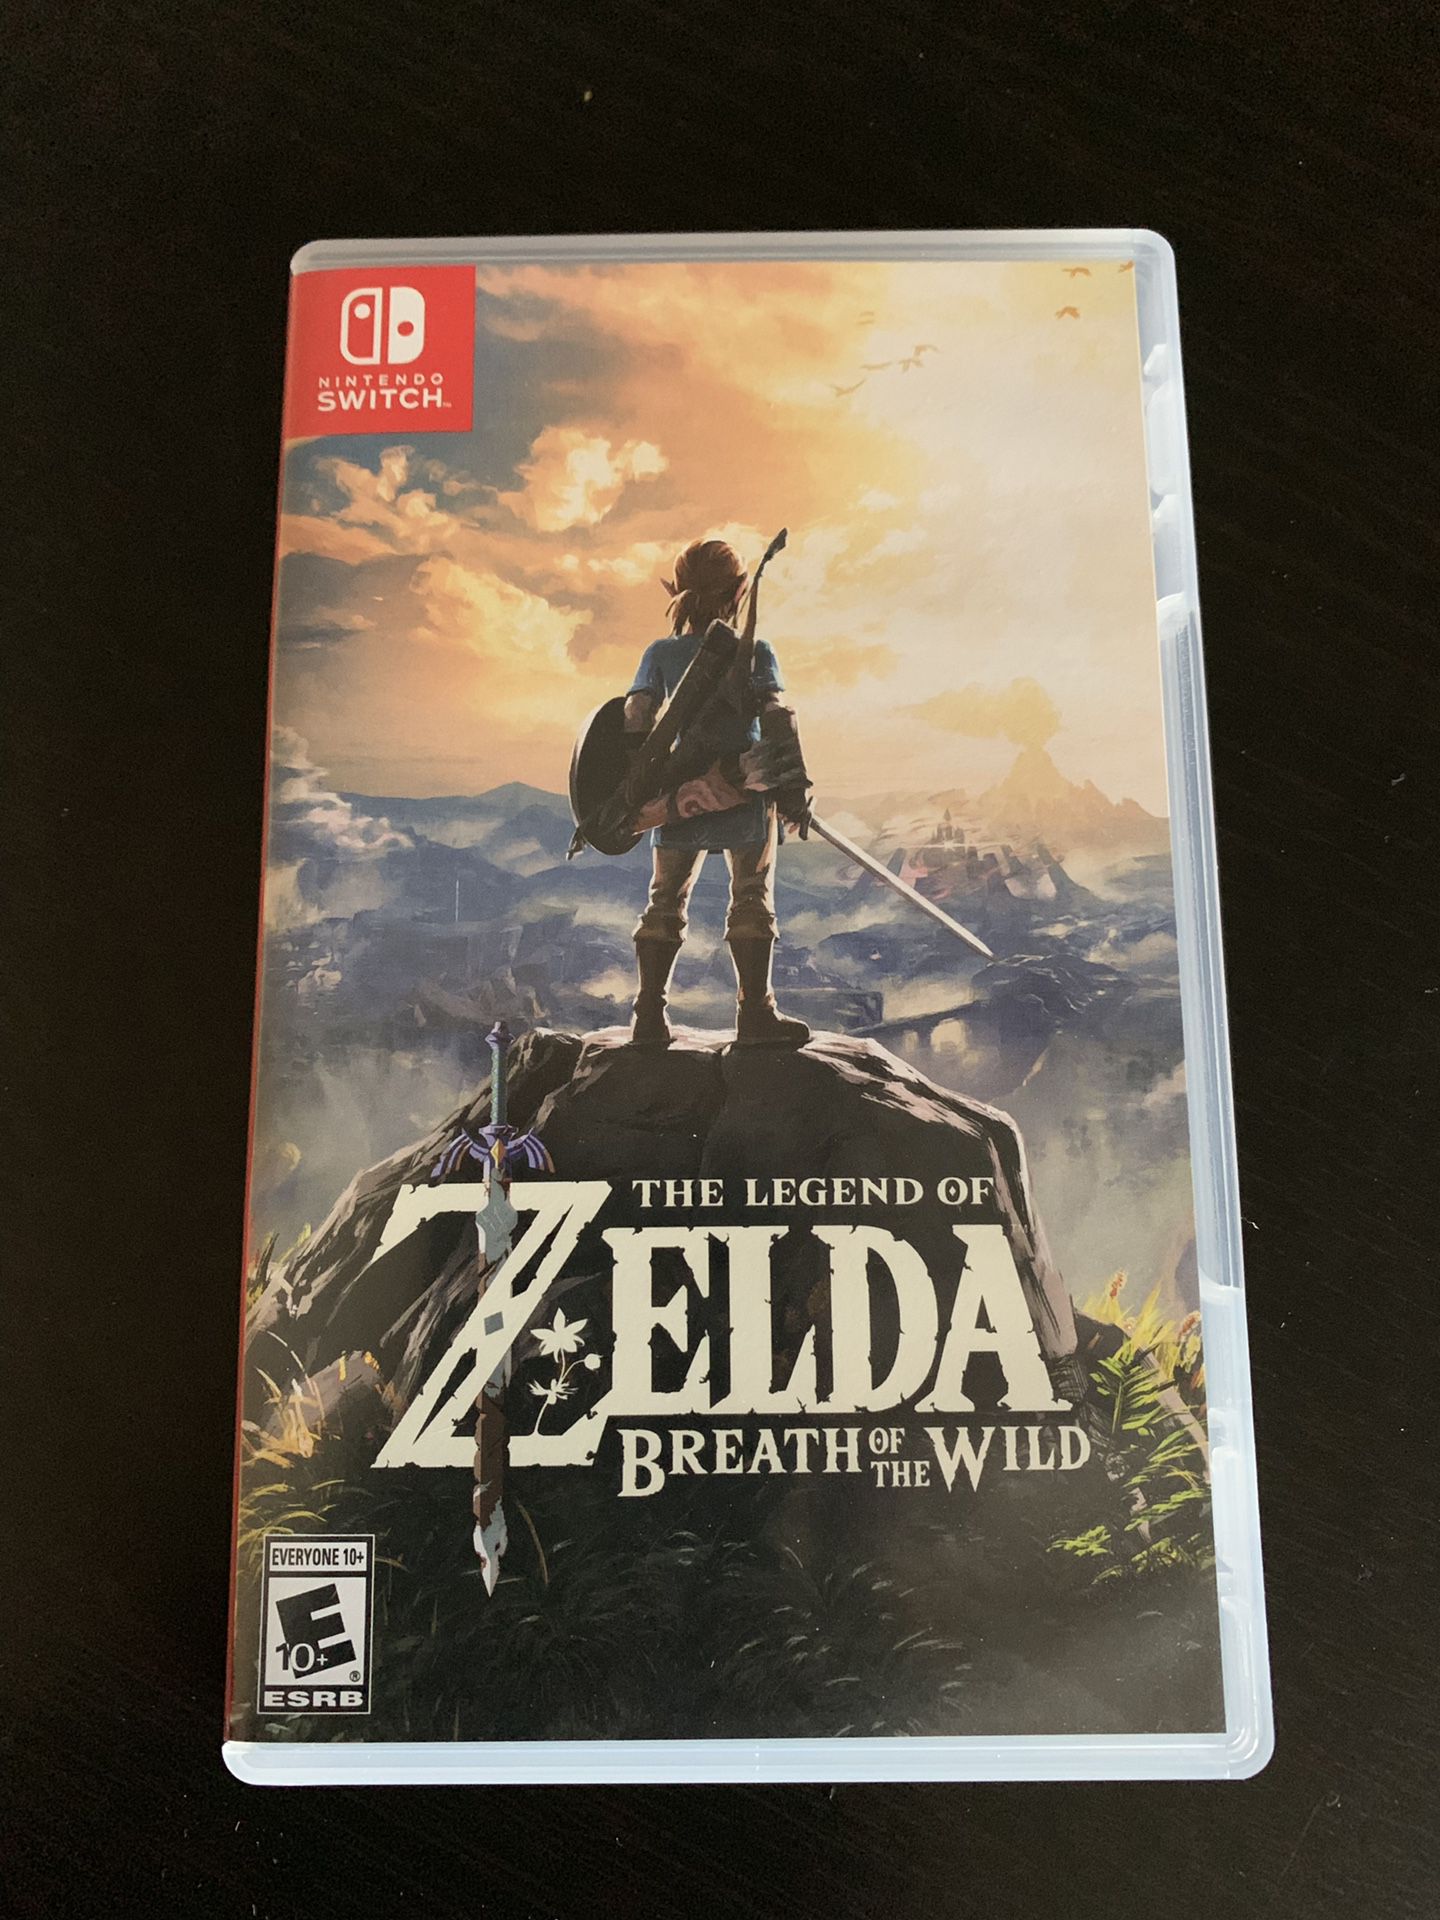 The Legend of Zelda: Breath of the Wild for the Nintendo Switch